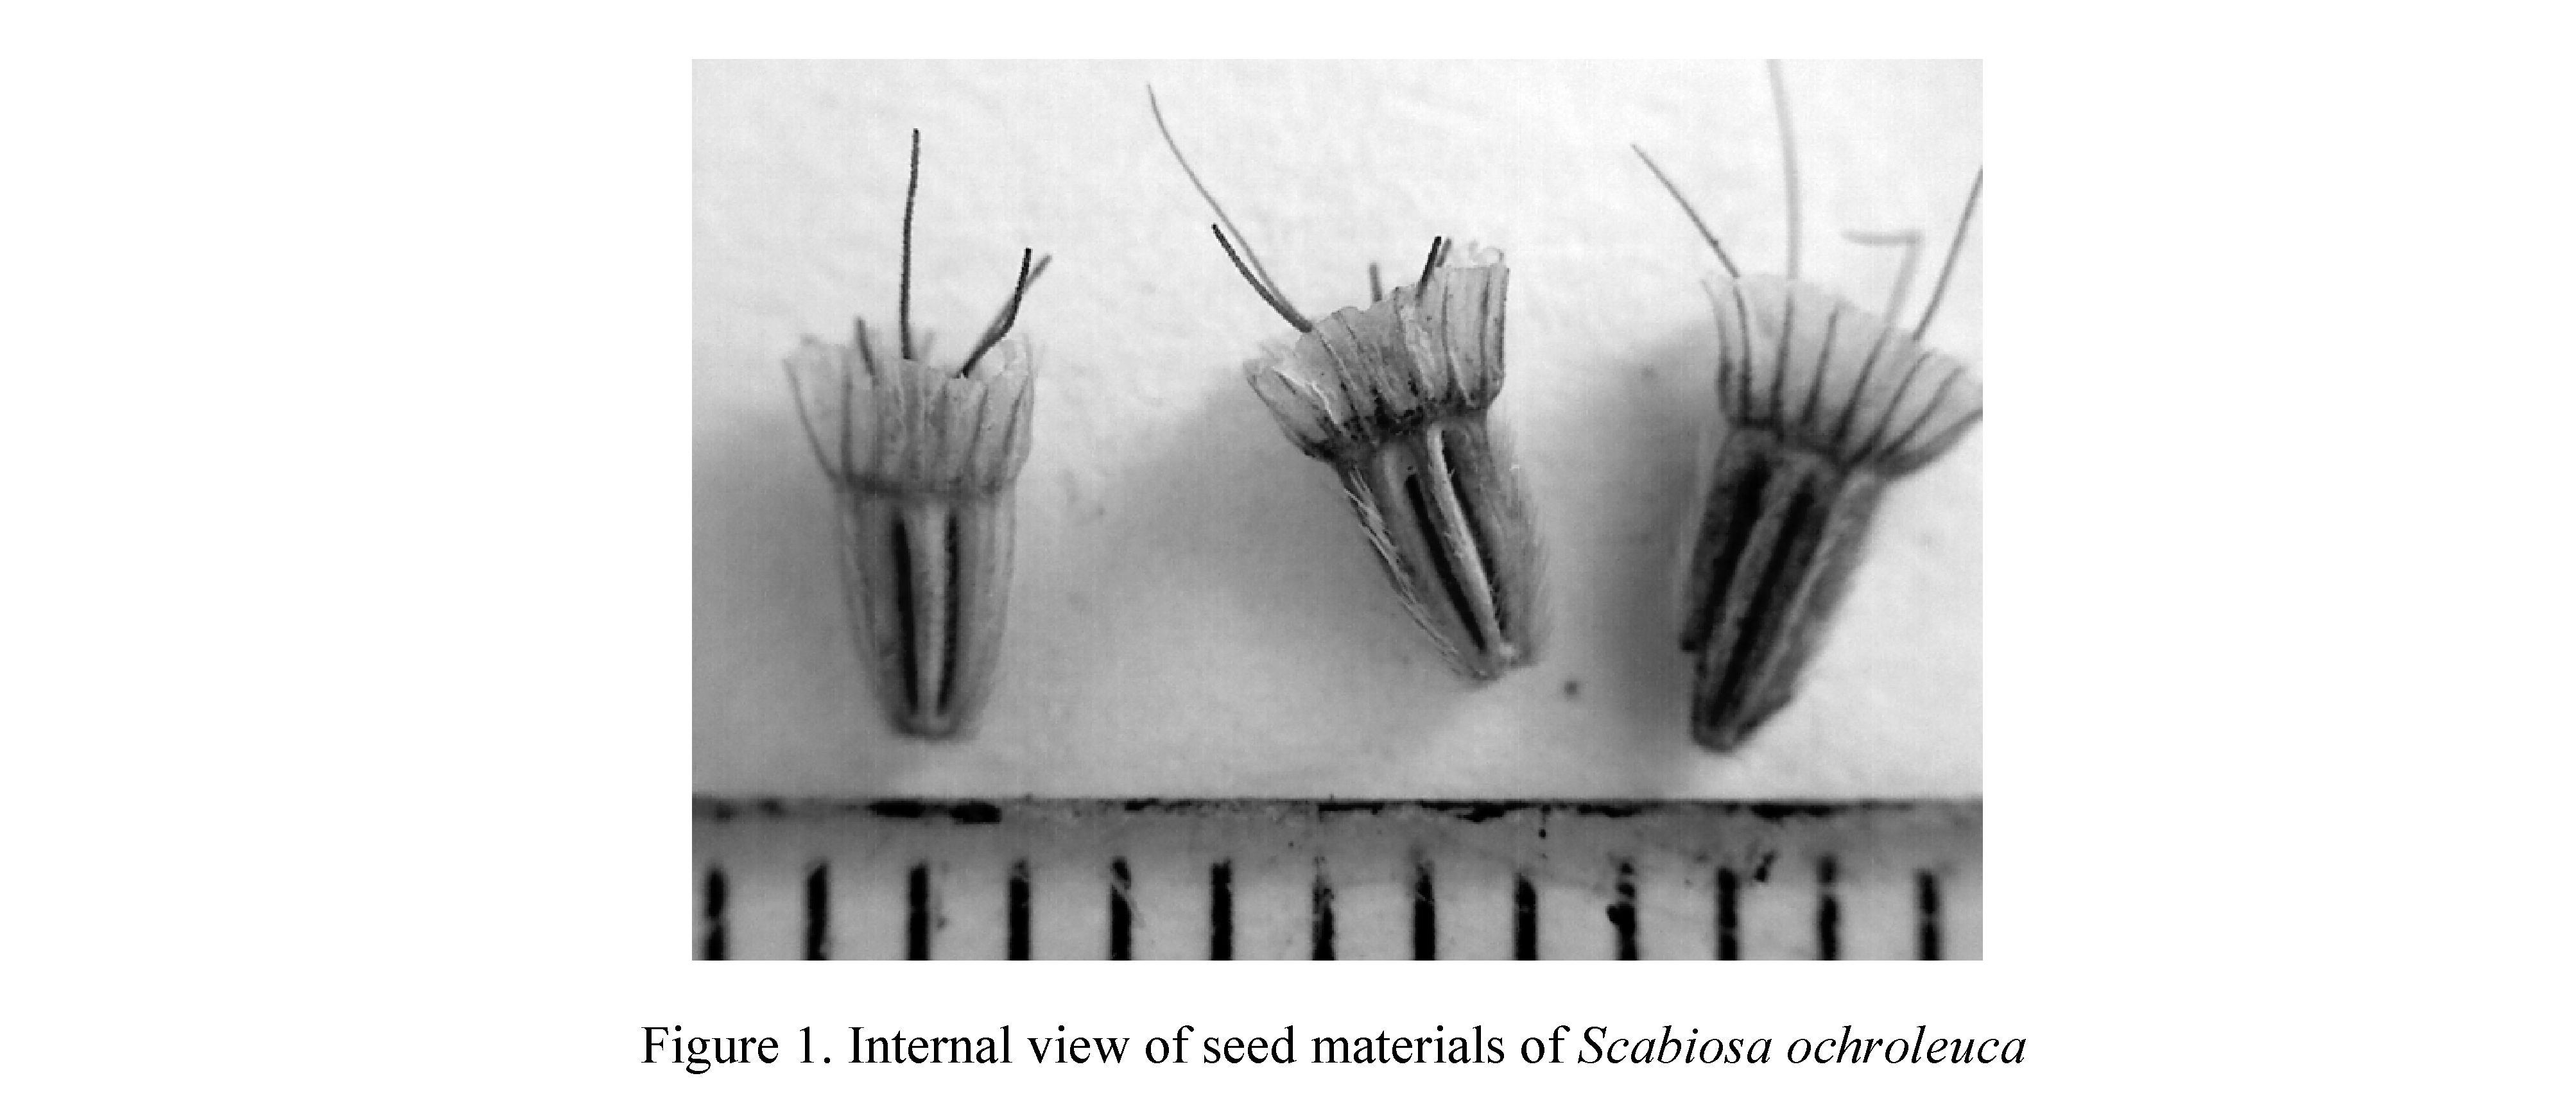 Study of peculiarities of morphology and germination of seeds of Scabiosa ochroleuca from the Central Kazakhstan